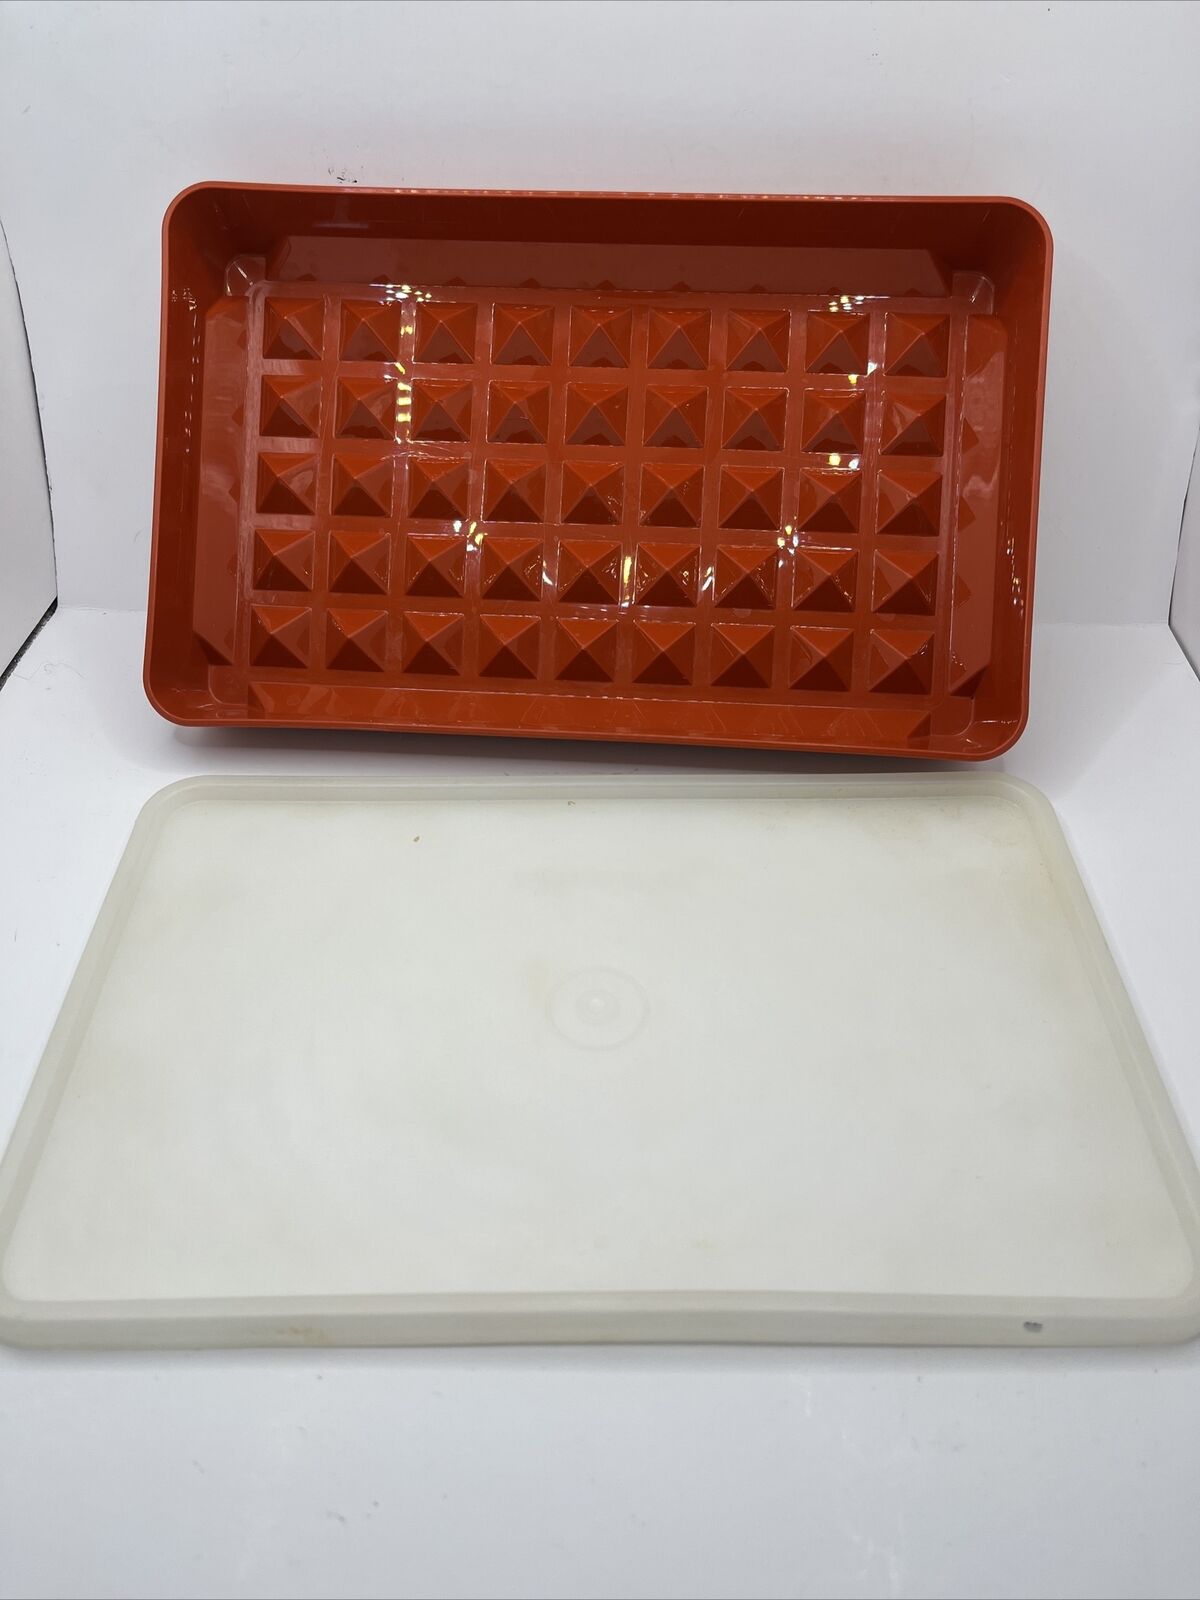 Vintage Tupperware Deli Meat Keeper Paprika Red w/ Lid Made in USA